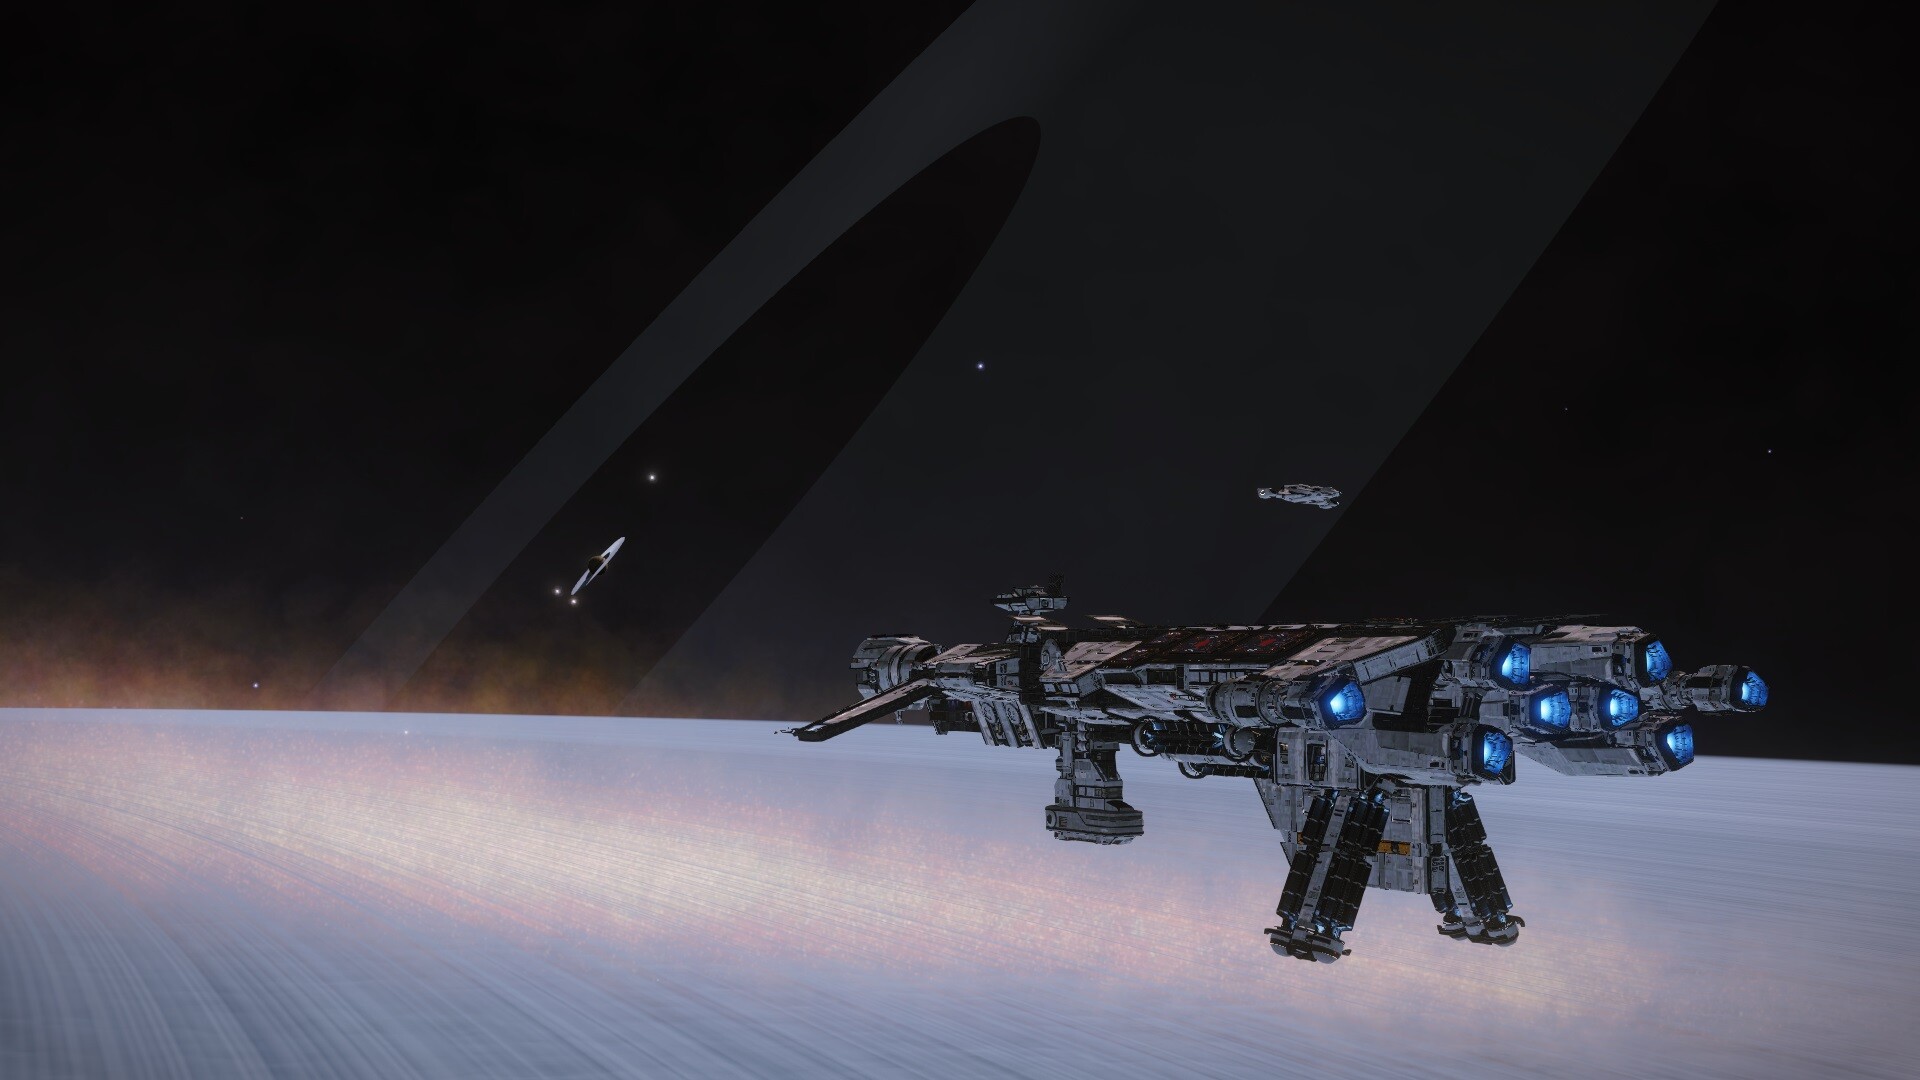 The I.S.V. Schwarzschild orbiting Planet AB 2 E in system OOC FLEAU GG-F D11-0 - Tenebris Sector